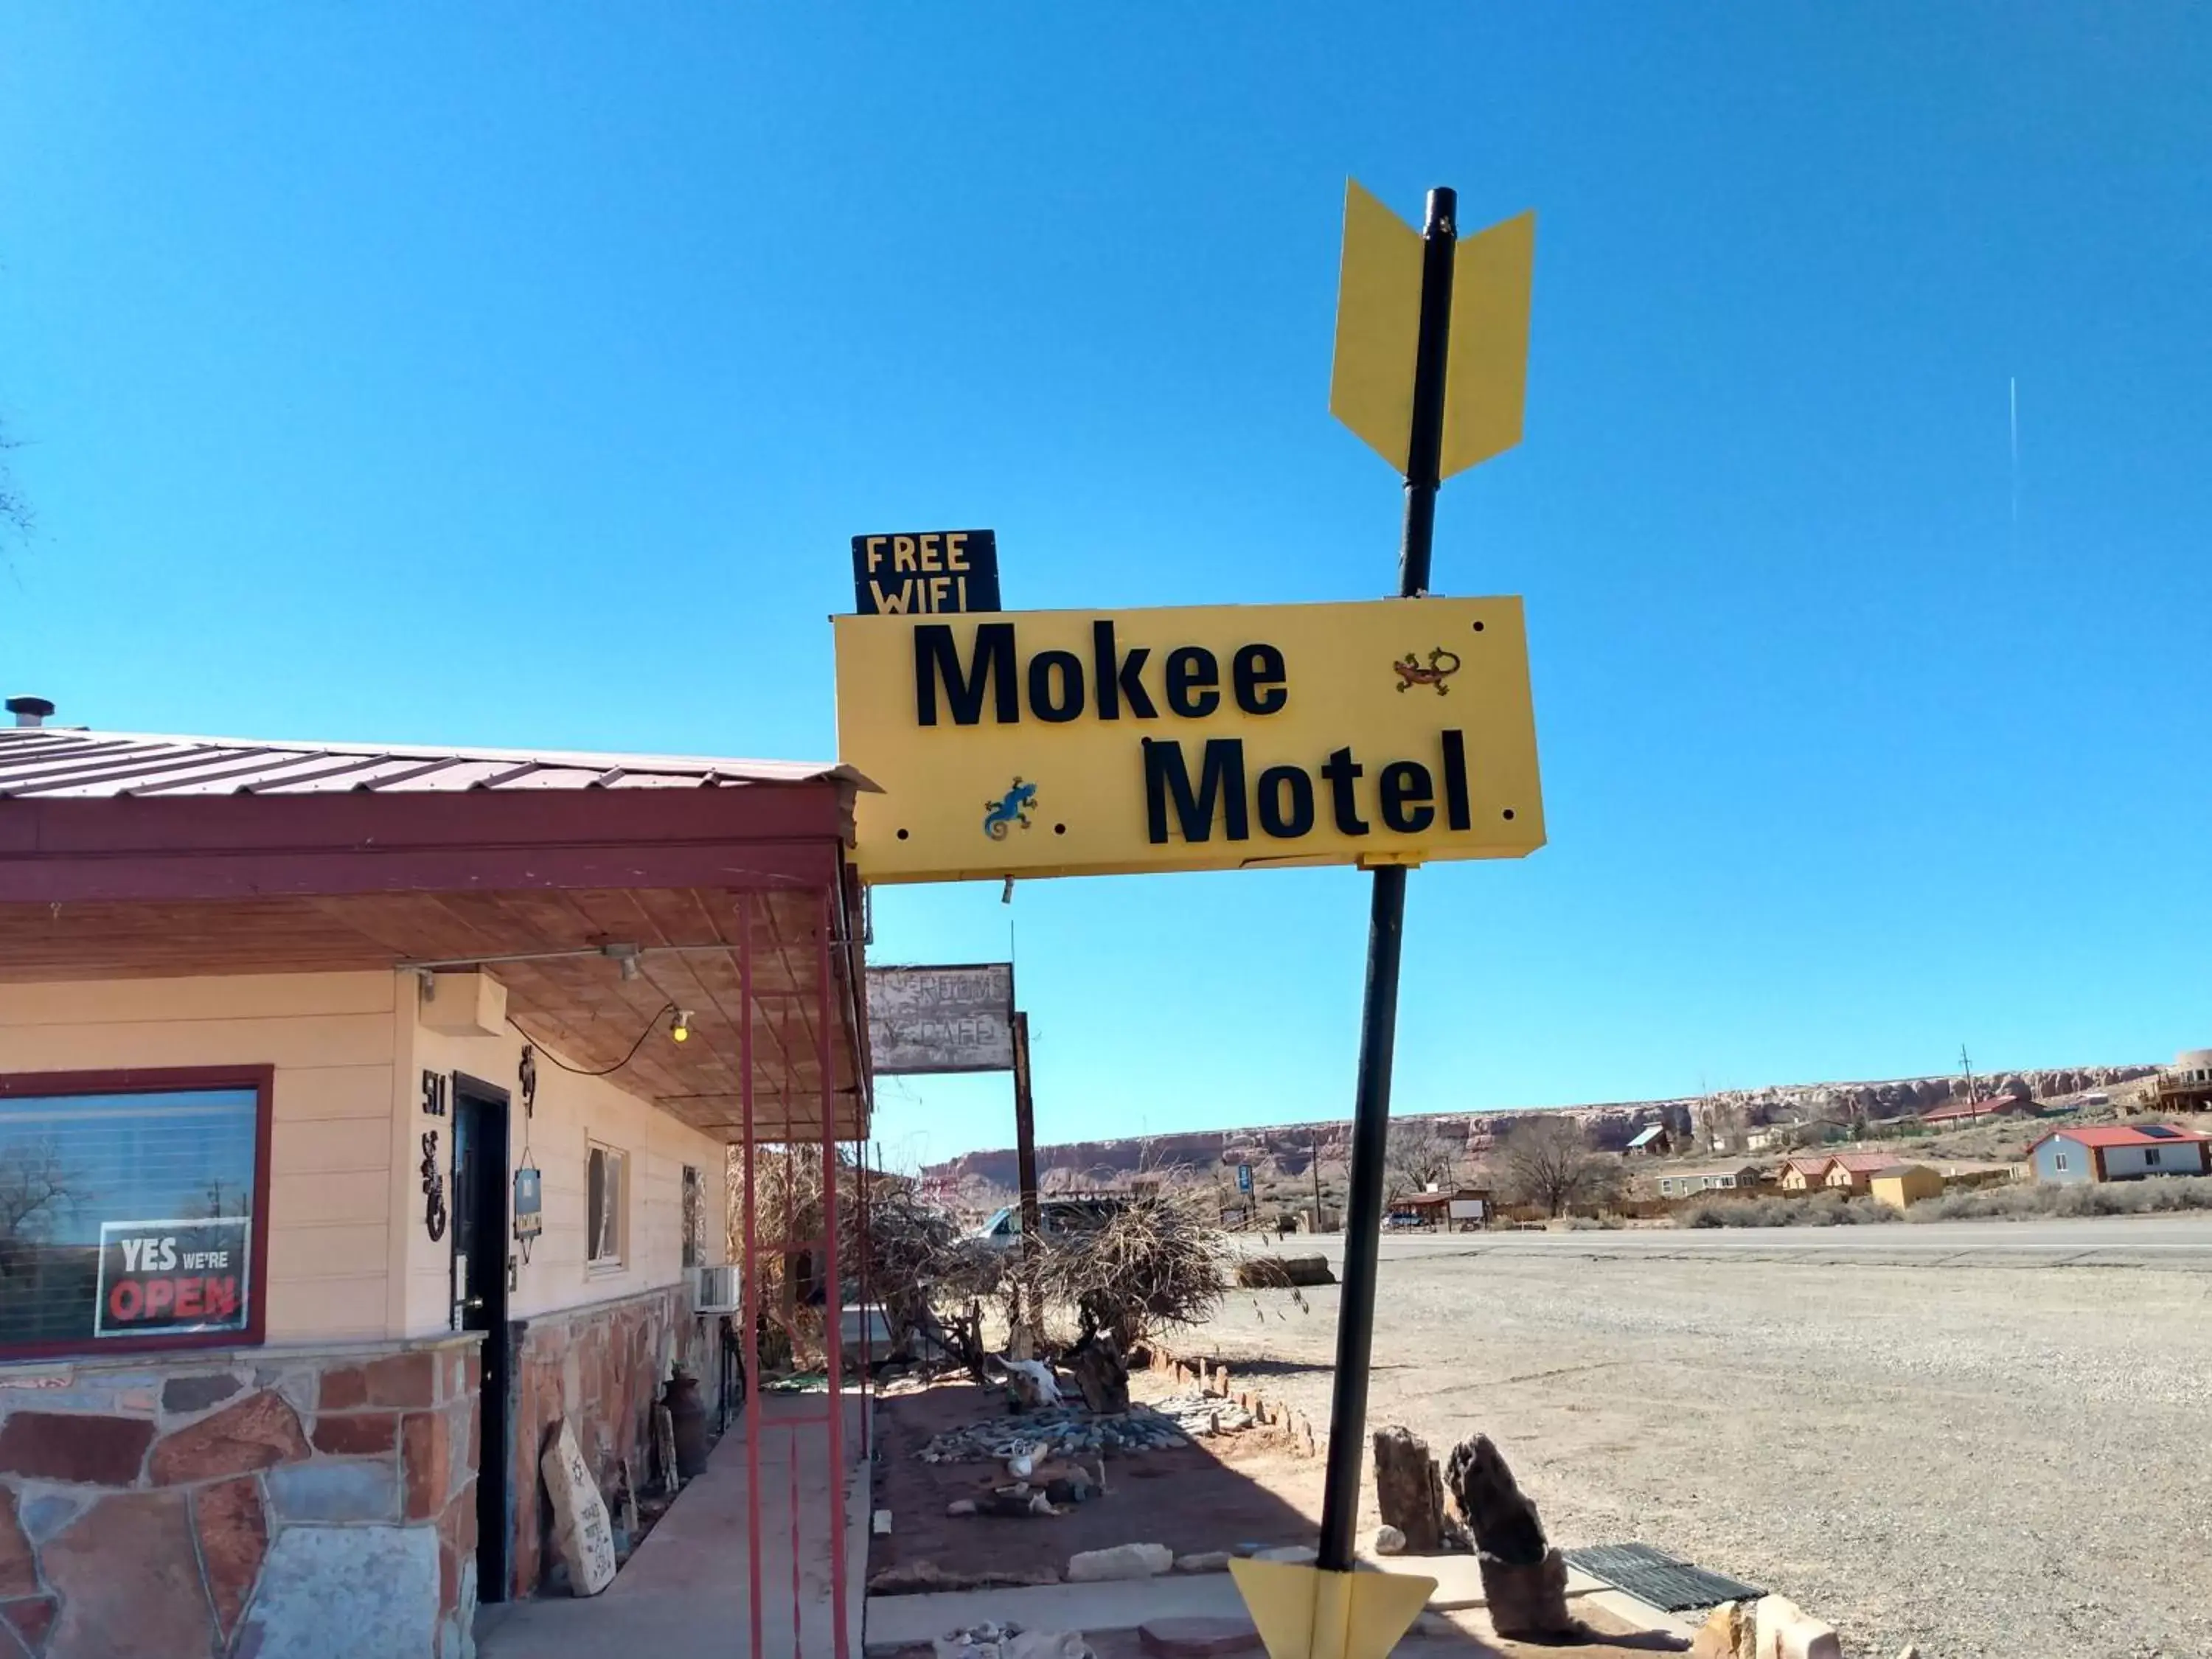 Property building in Mokee Motel